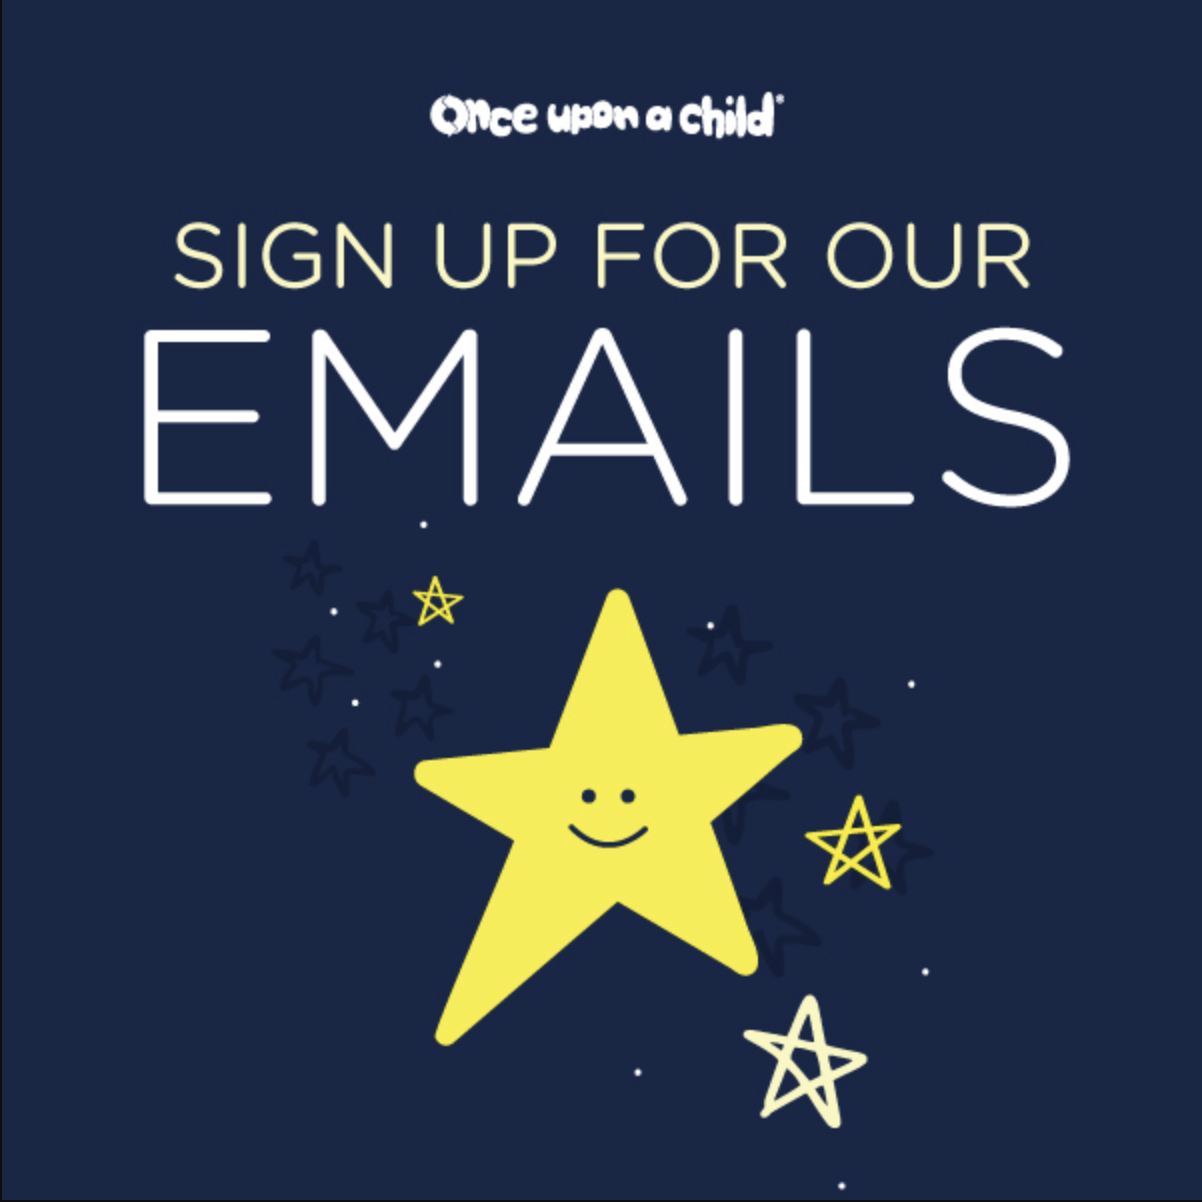 Sign up for our emails